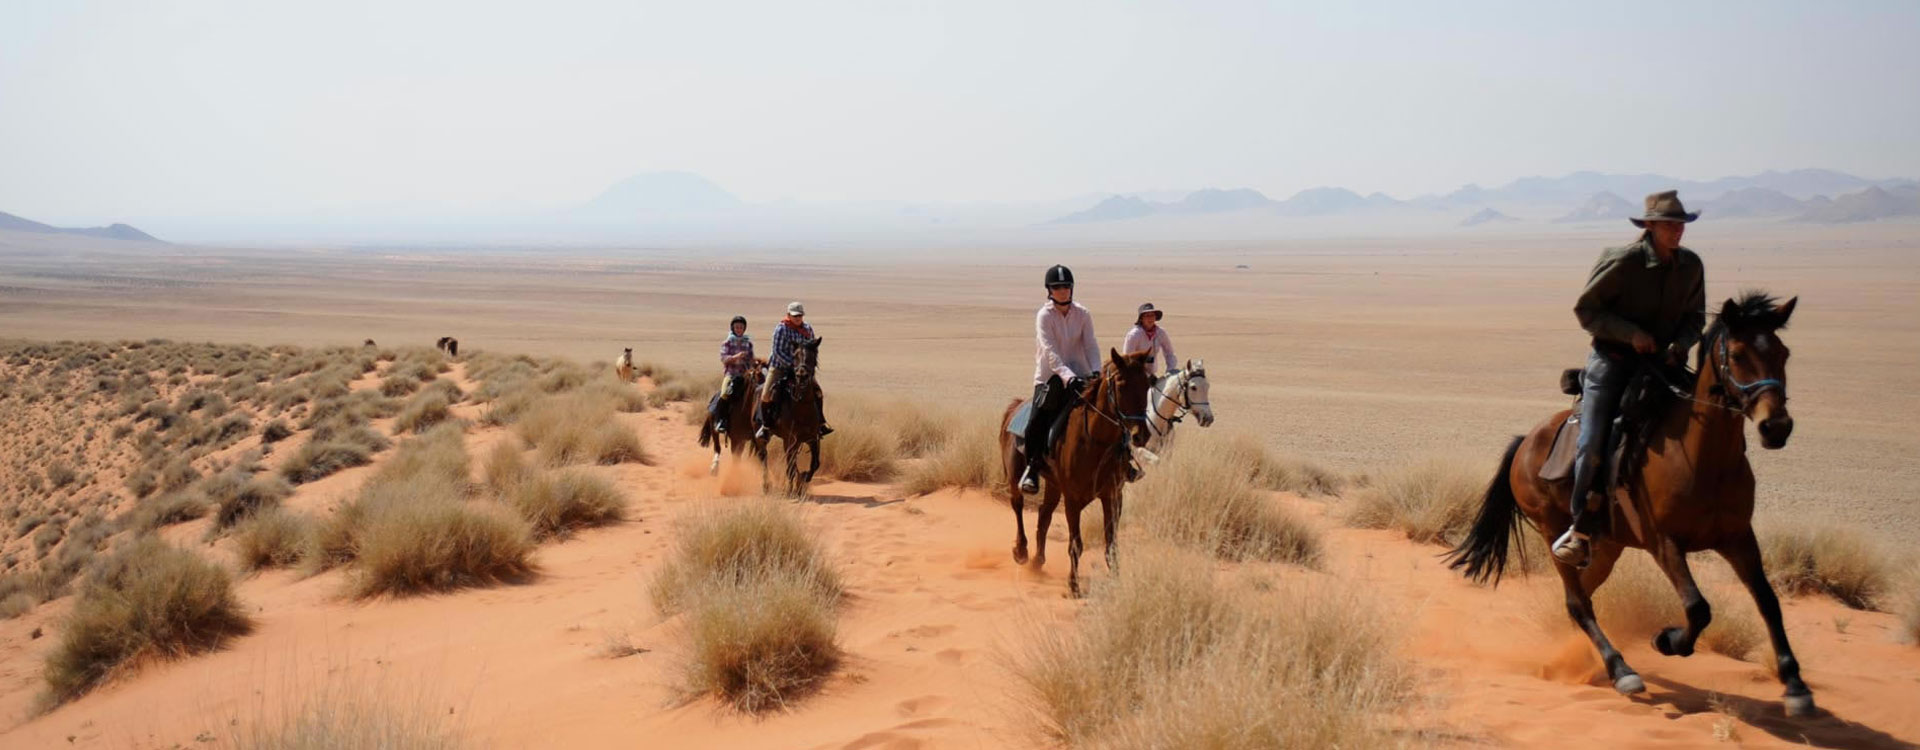 6 Day Desert Homestead and Horse Trails Namibia